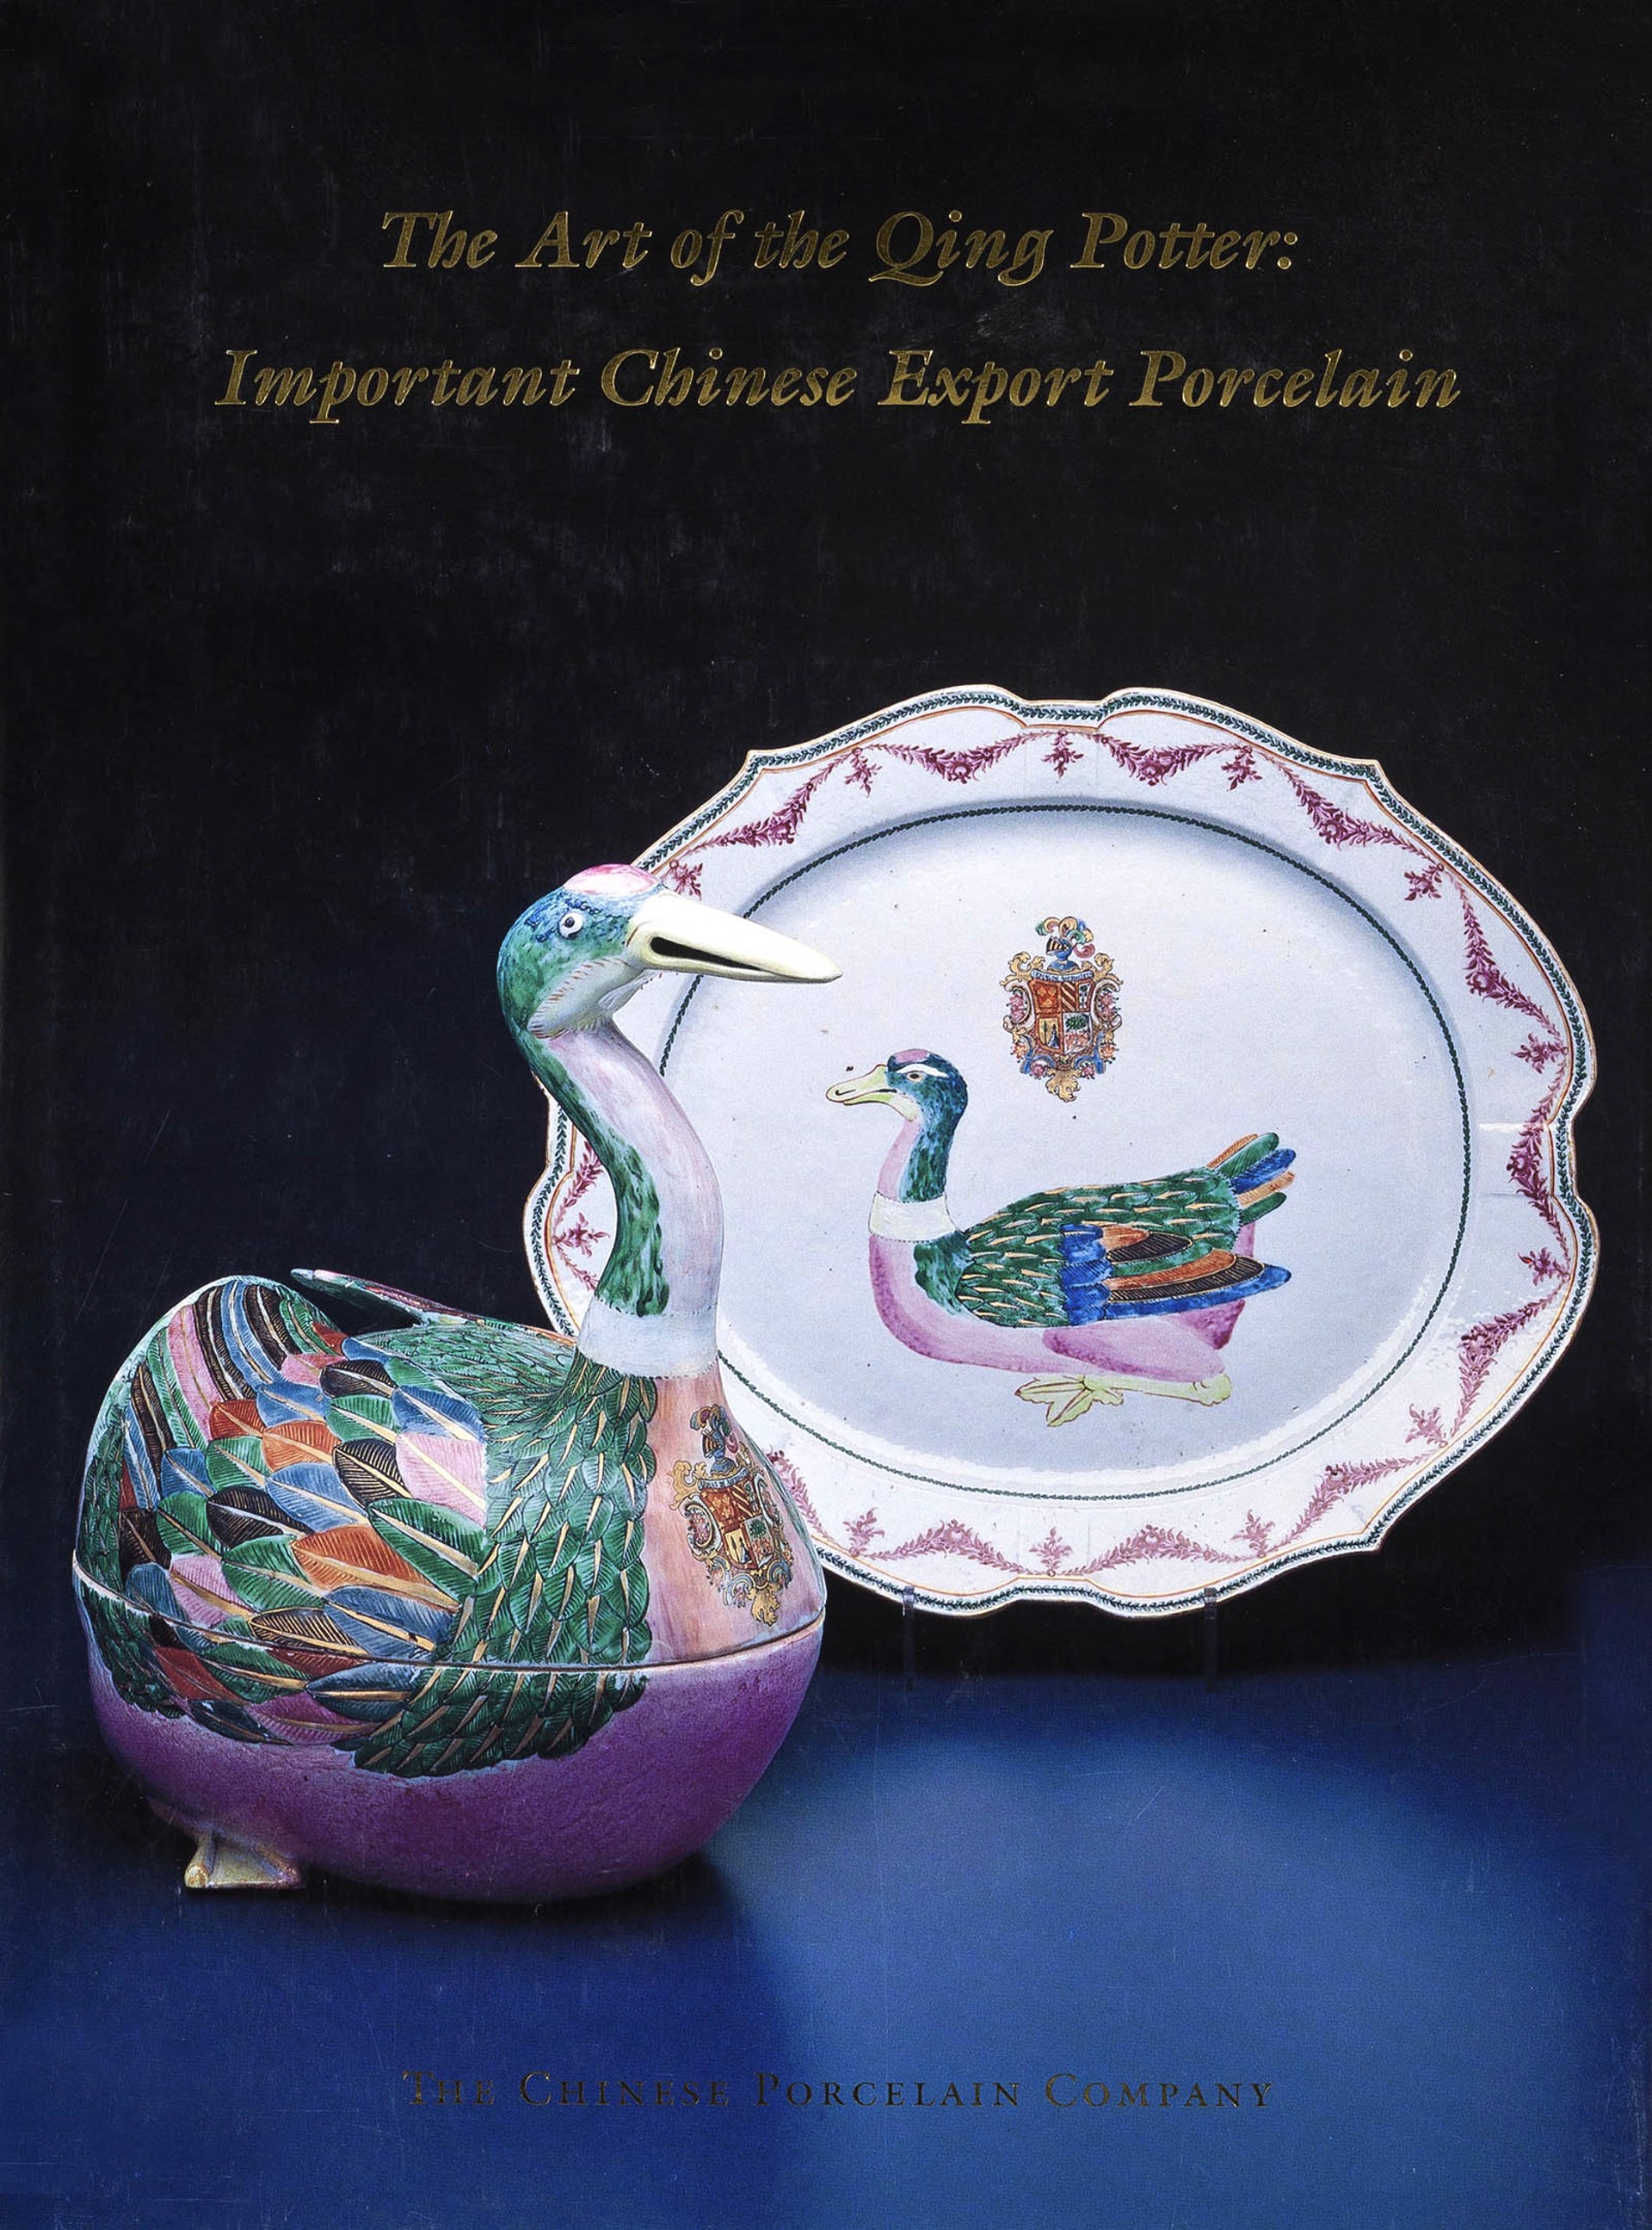 The Art of th Qing Potter: Important Chinese Export Porcelain by Catalog 21